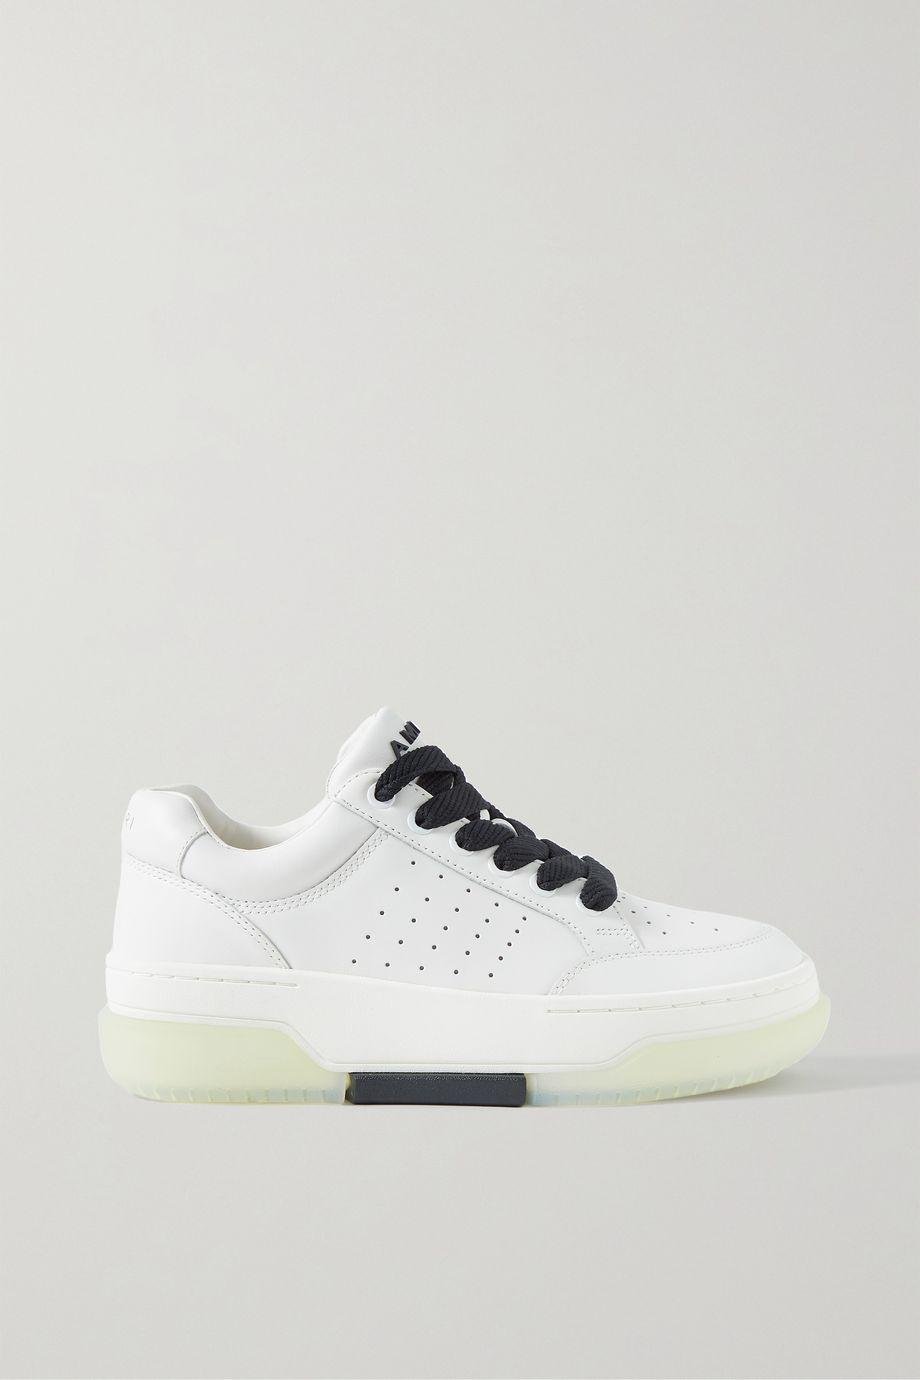 Stadium perforated leather sneakers by AMIRI